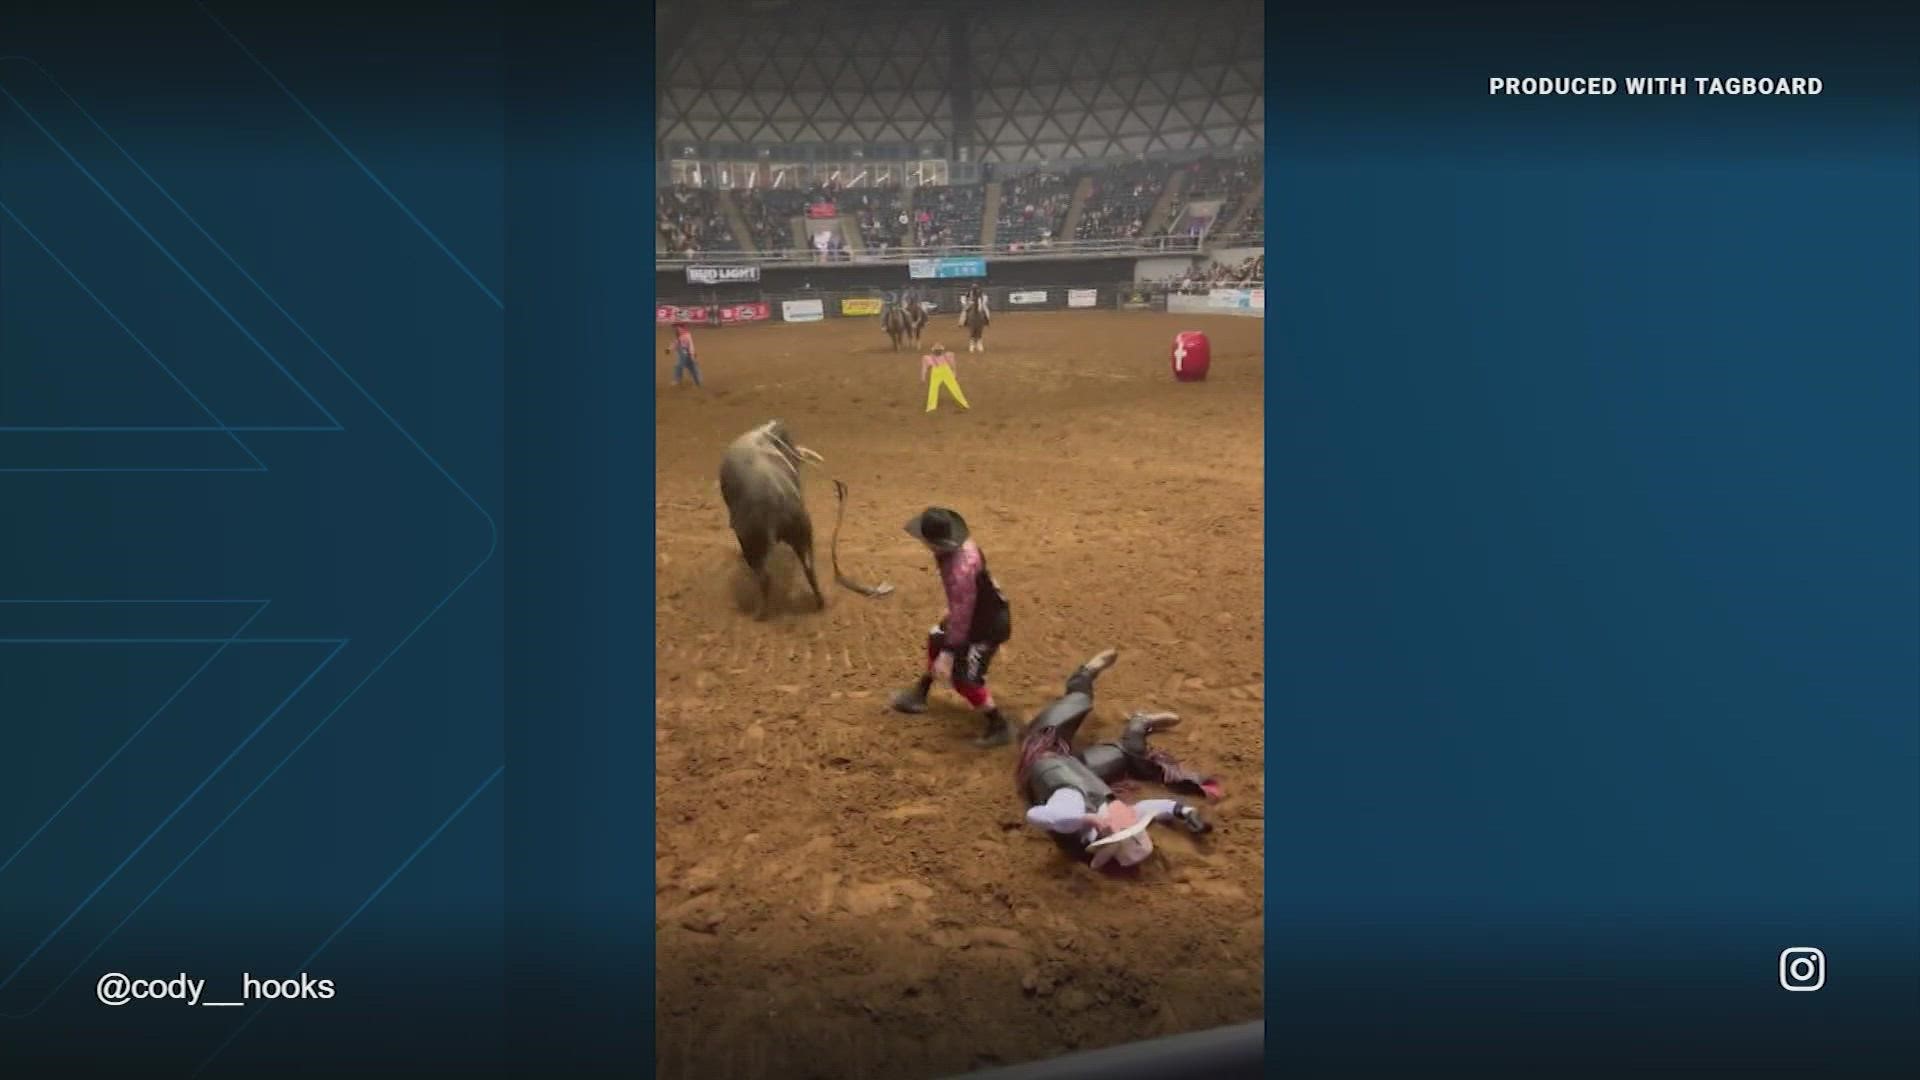 The bull rider is bucked off and lying unconscious on the ground. That's when his father jumped in to shield his son from the bull.